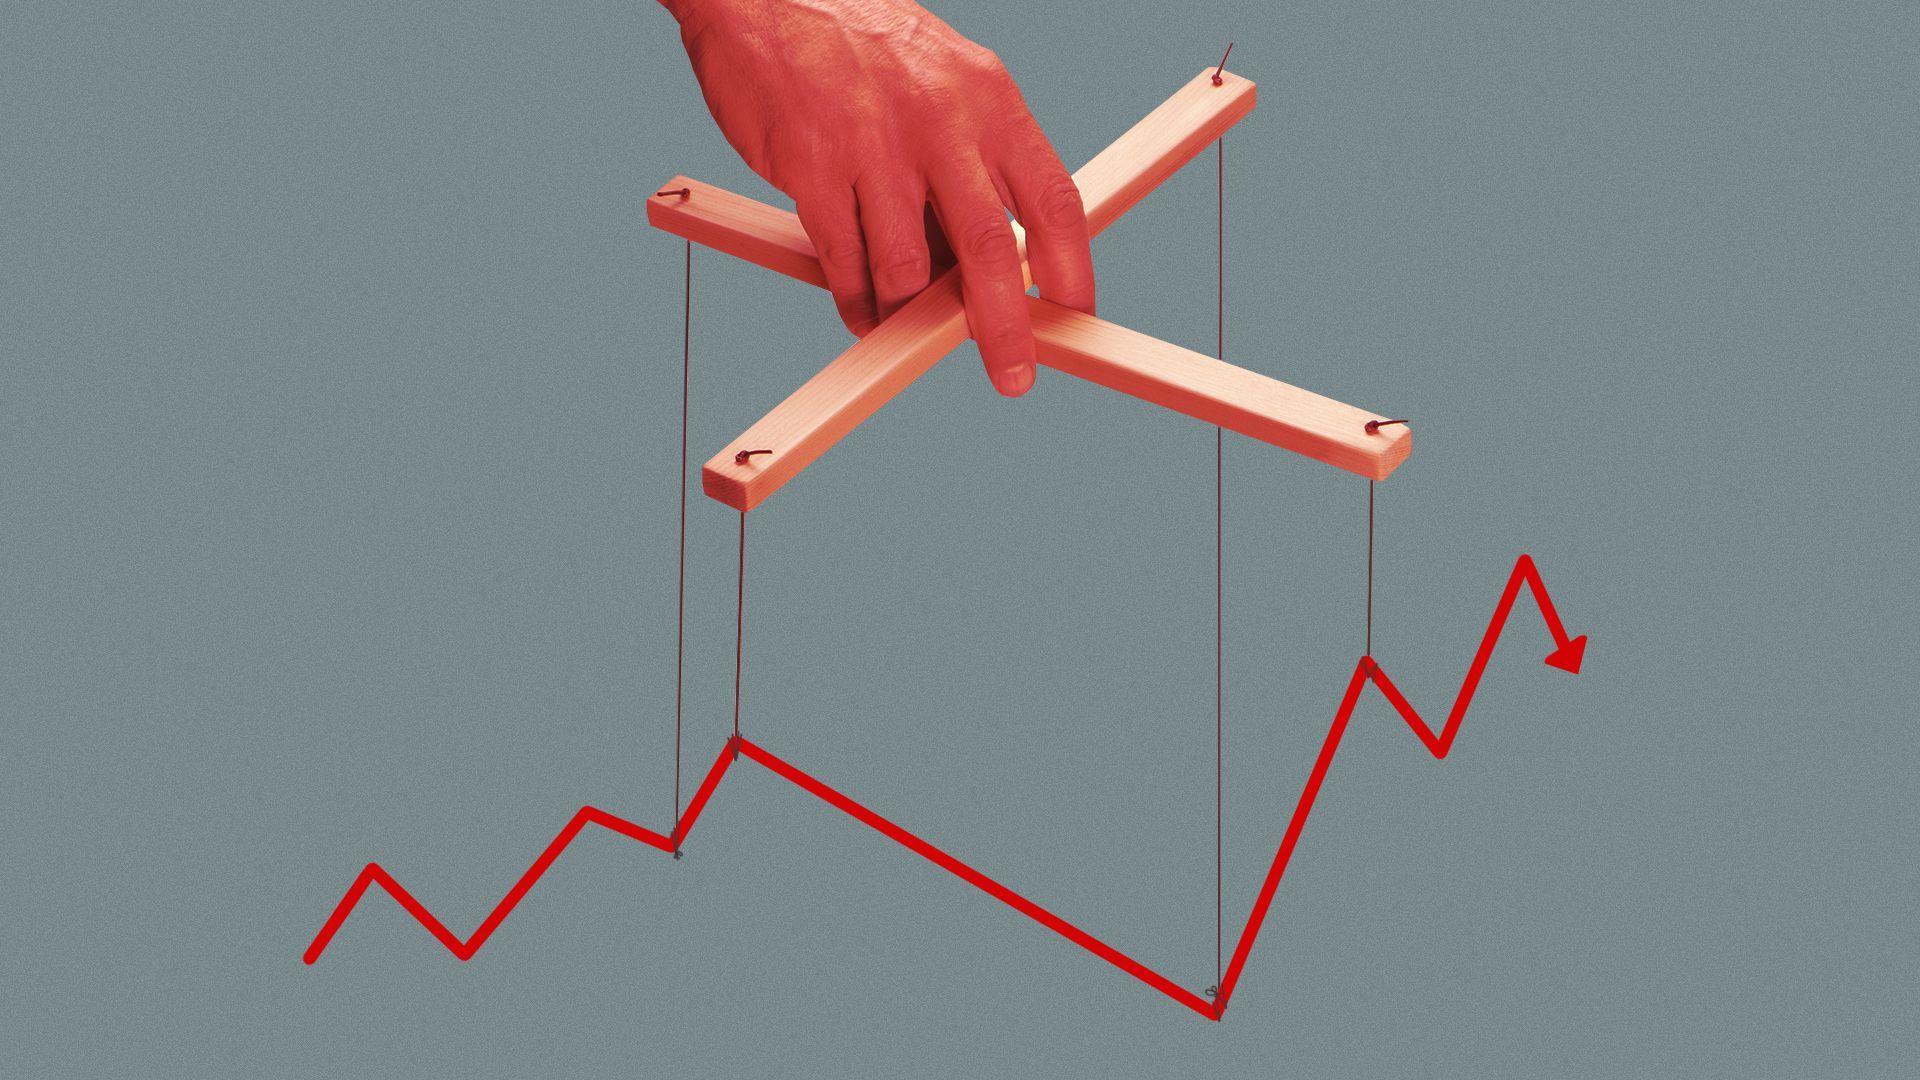 Illustration of a hand operating a marionette attached to a stock trend line